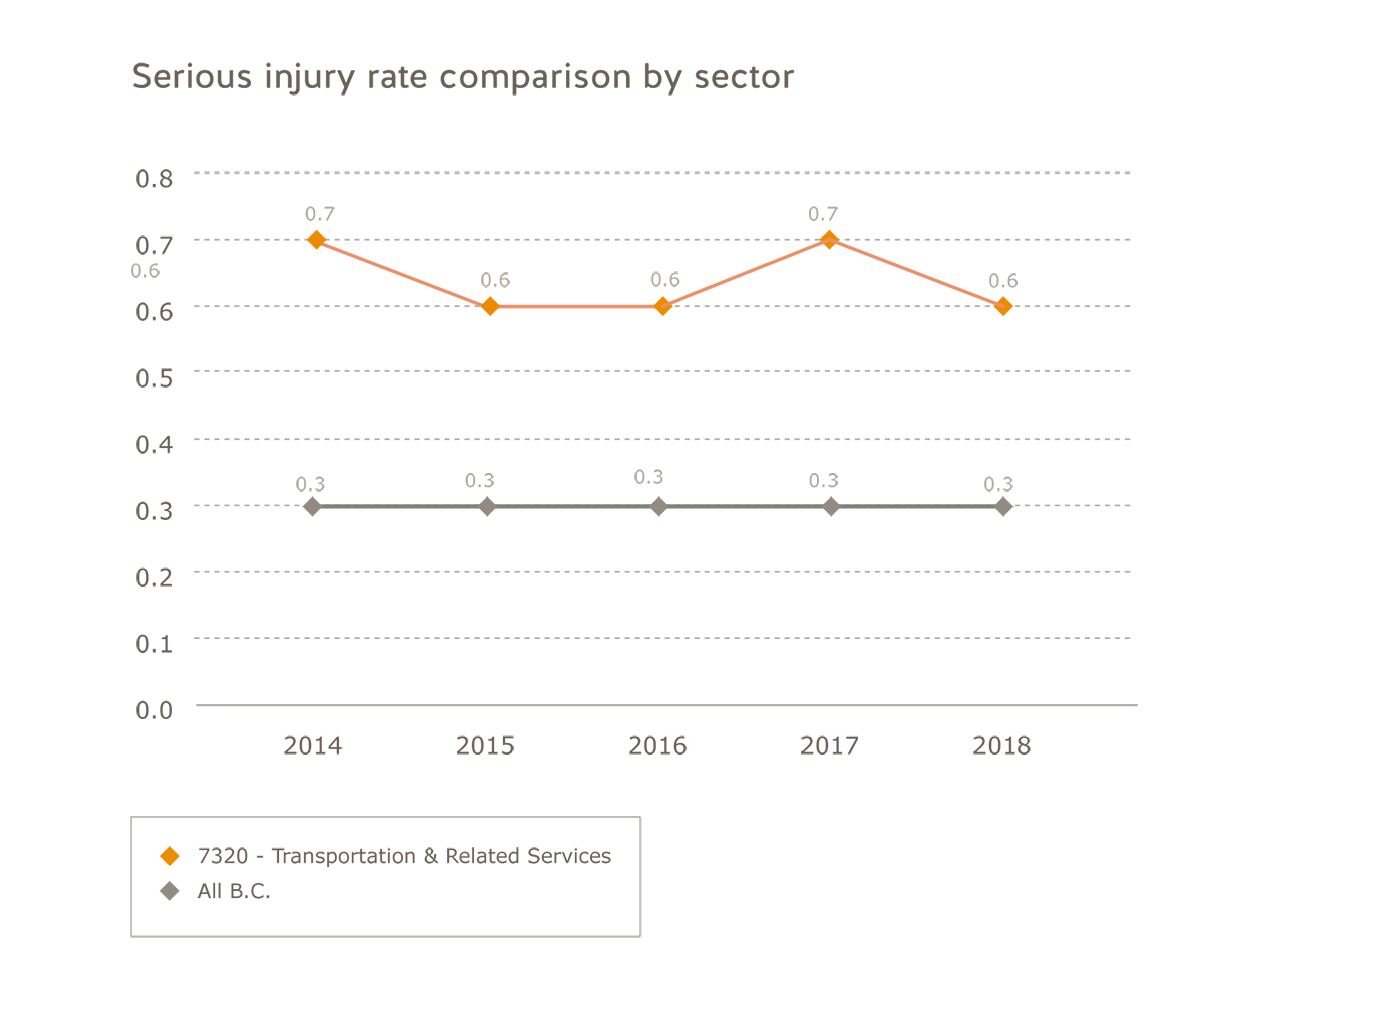 Transportation industry serious injury rate comparison by sector for 2014 to 2018. Transportation: 2014=0.7; 2015=0.5; 2016=0.6; 2017=0.7; 2018=0.6. All B.C.: 2014=0.3; 2015=0.3; 2016=0.3; 2017=0.3; 2018=0.3